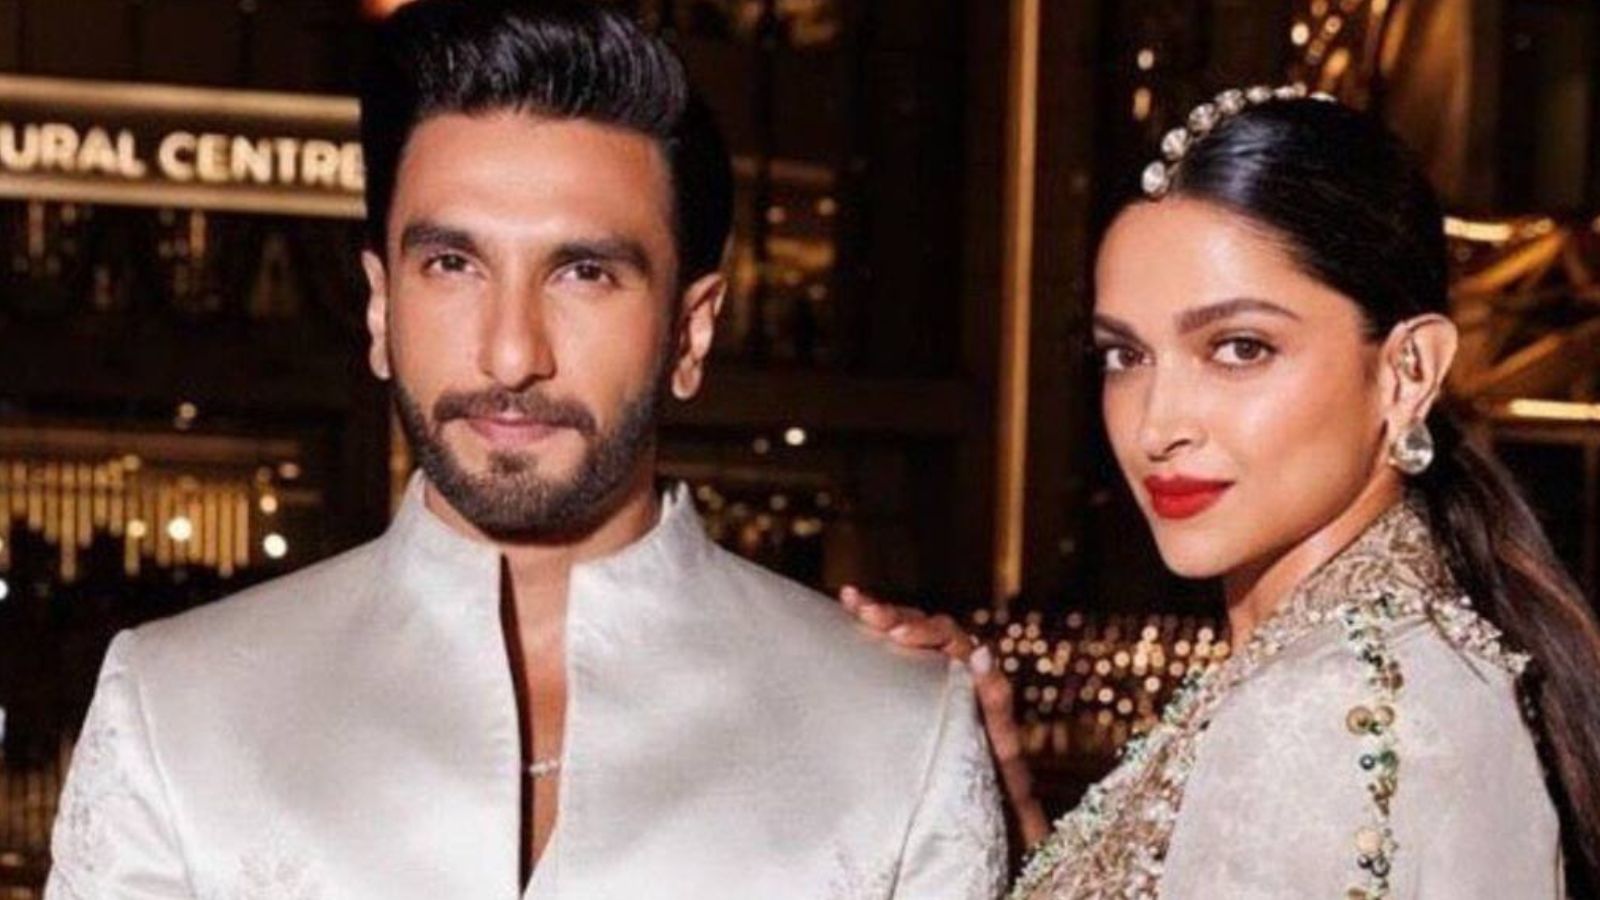 Deepika Padukone says spending time with Ranveer Singh is very important to her: ‘We have to schedule it’ | Bollywood News